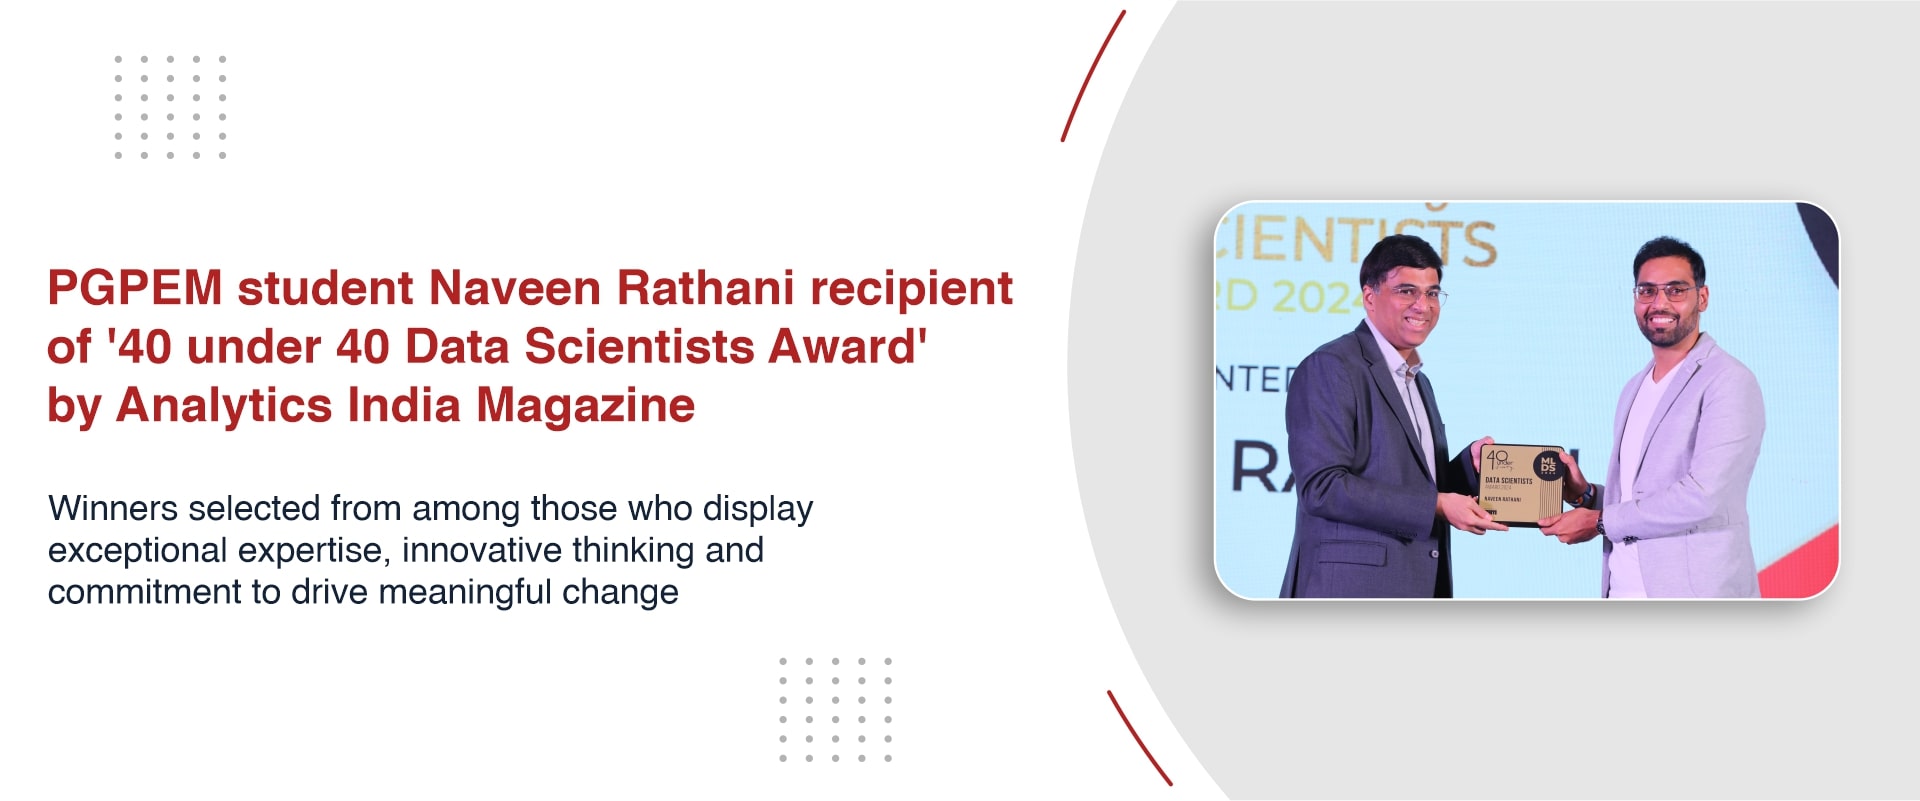 PGPEM student Naveen Rathani recipient of ‘40 under 40 Data Scientists Award’ by Analytics India Magazine 